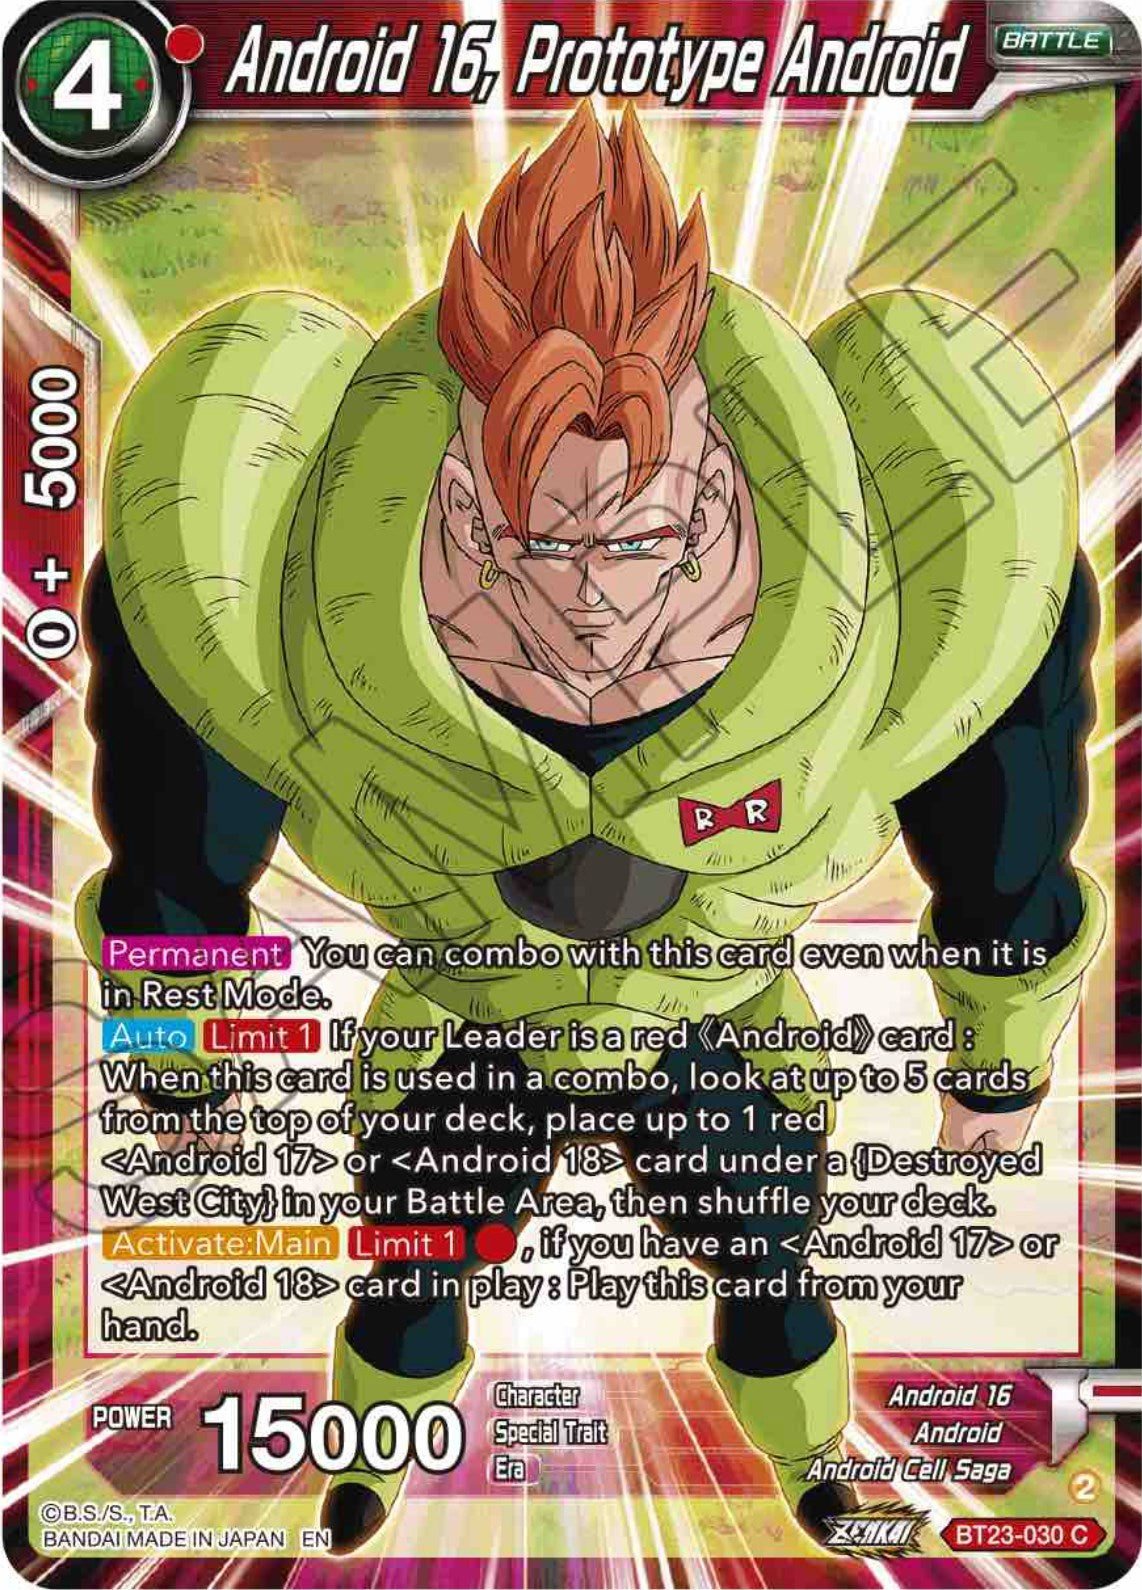 Android 16, Prototype Android (BT23-030) [Perfect Combination] | Rock City Comics